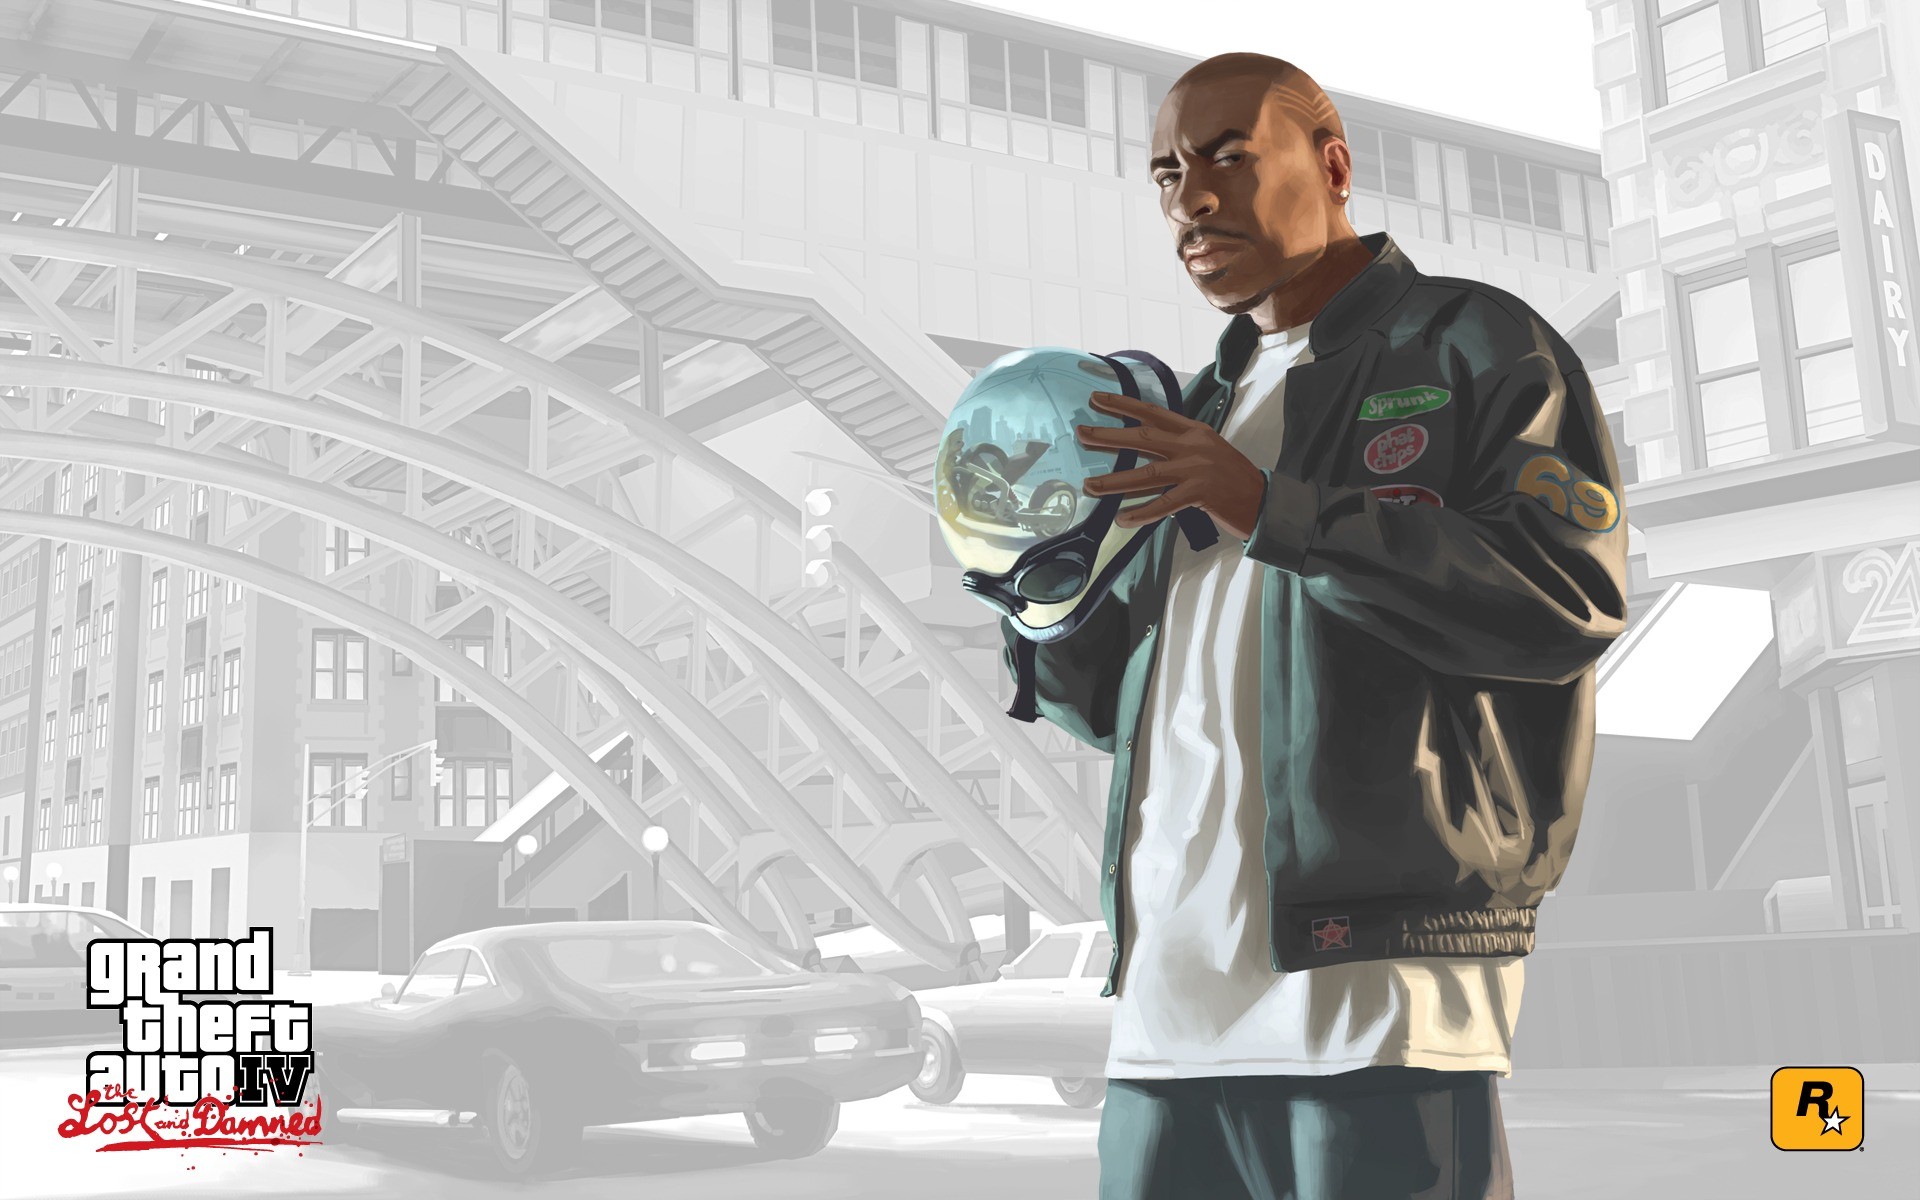 1920x1200 GTA The Lost And Damned Wallpaper GTA IV Games Wallpapers